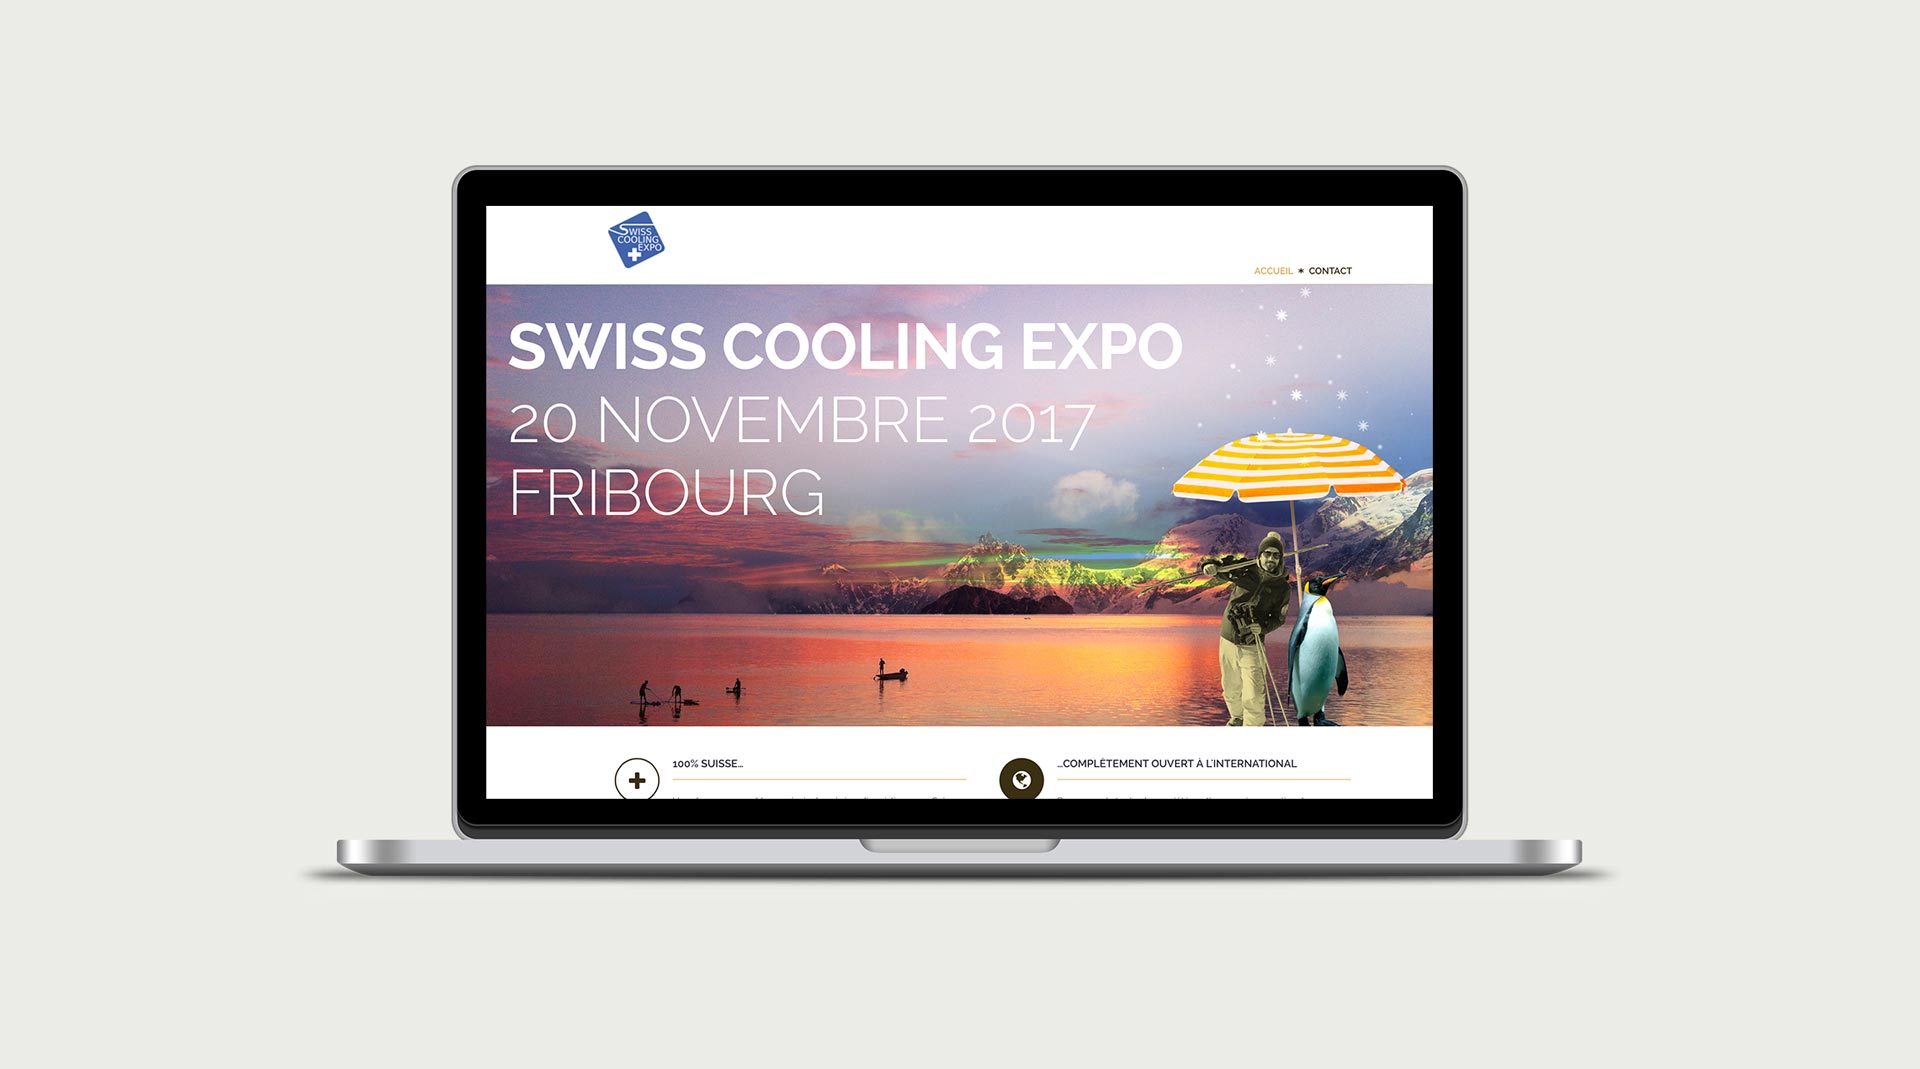 Swiss Cooling Expo 2017